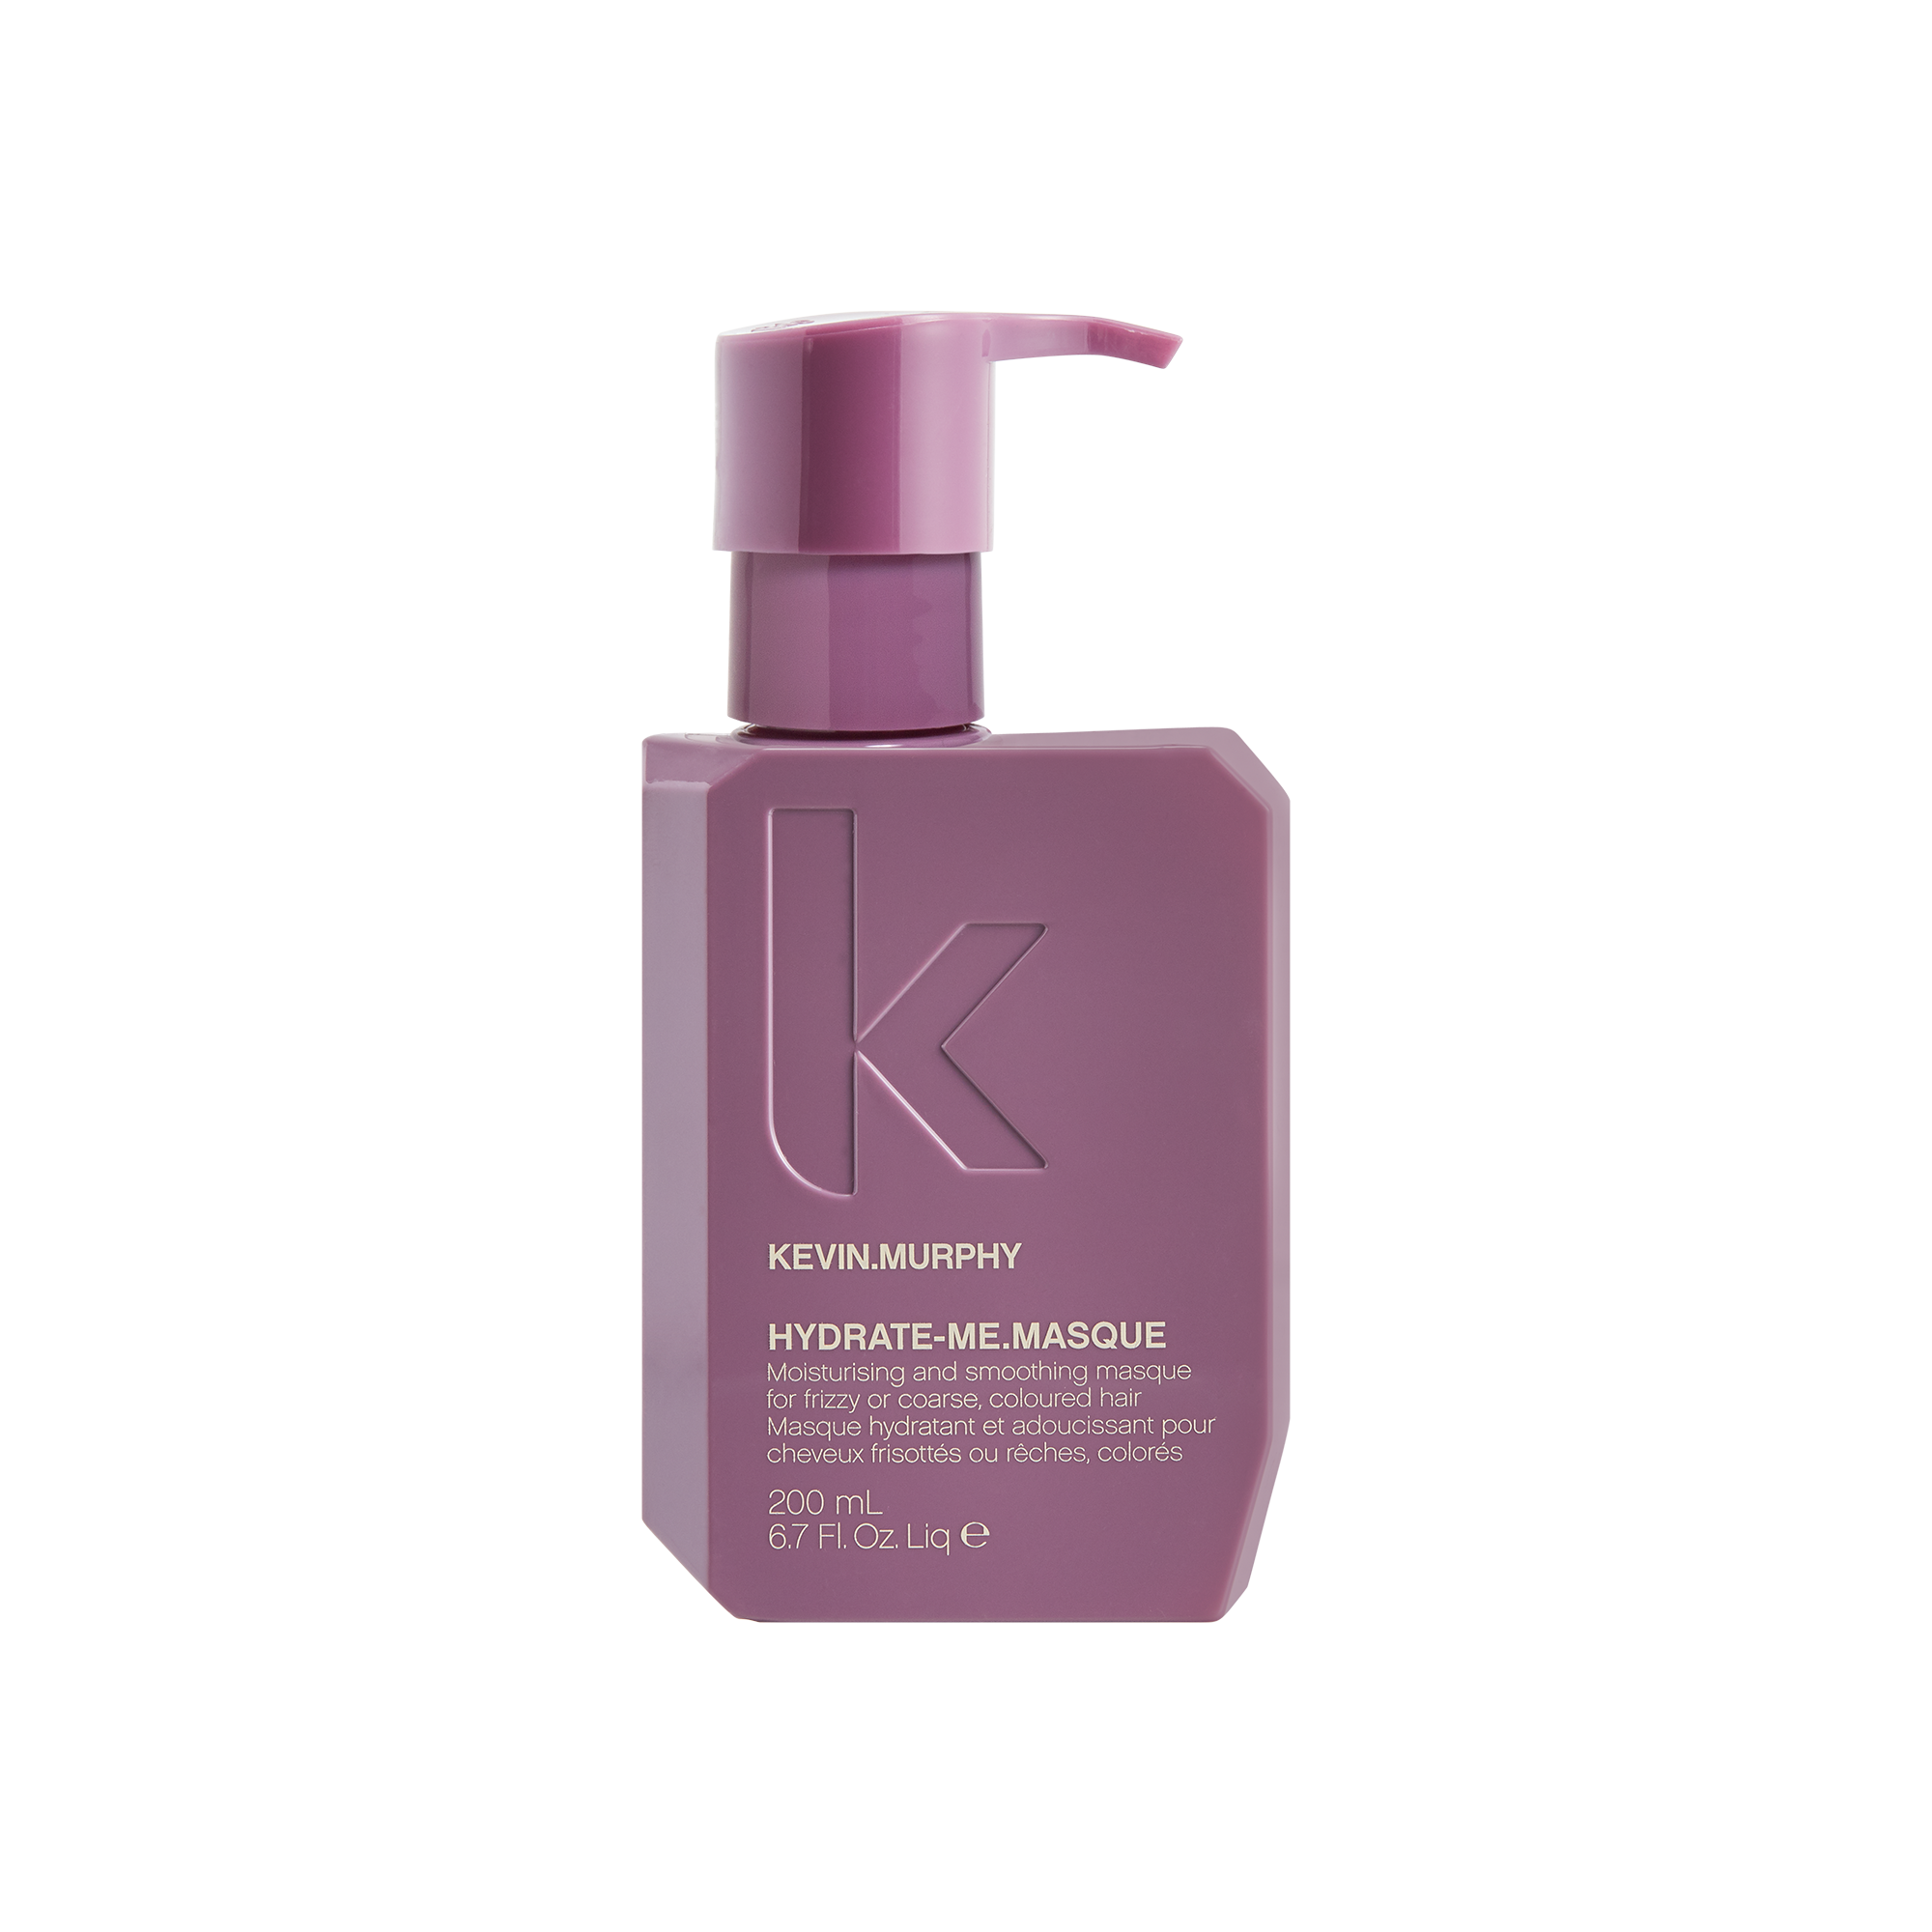 Kevin Murphy - Hydrate-Me.Masque 200 ml.